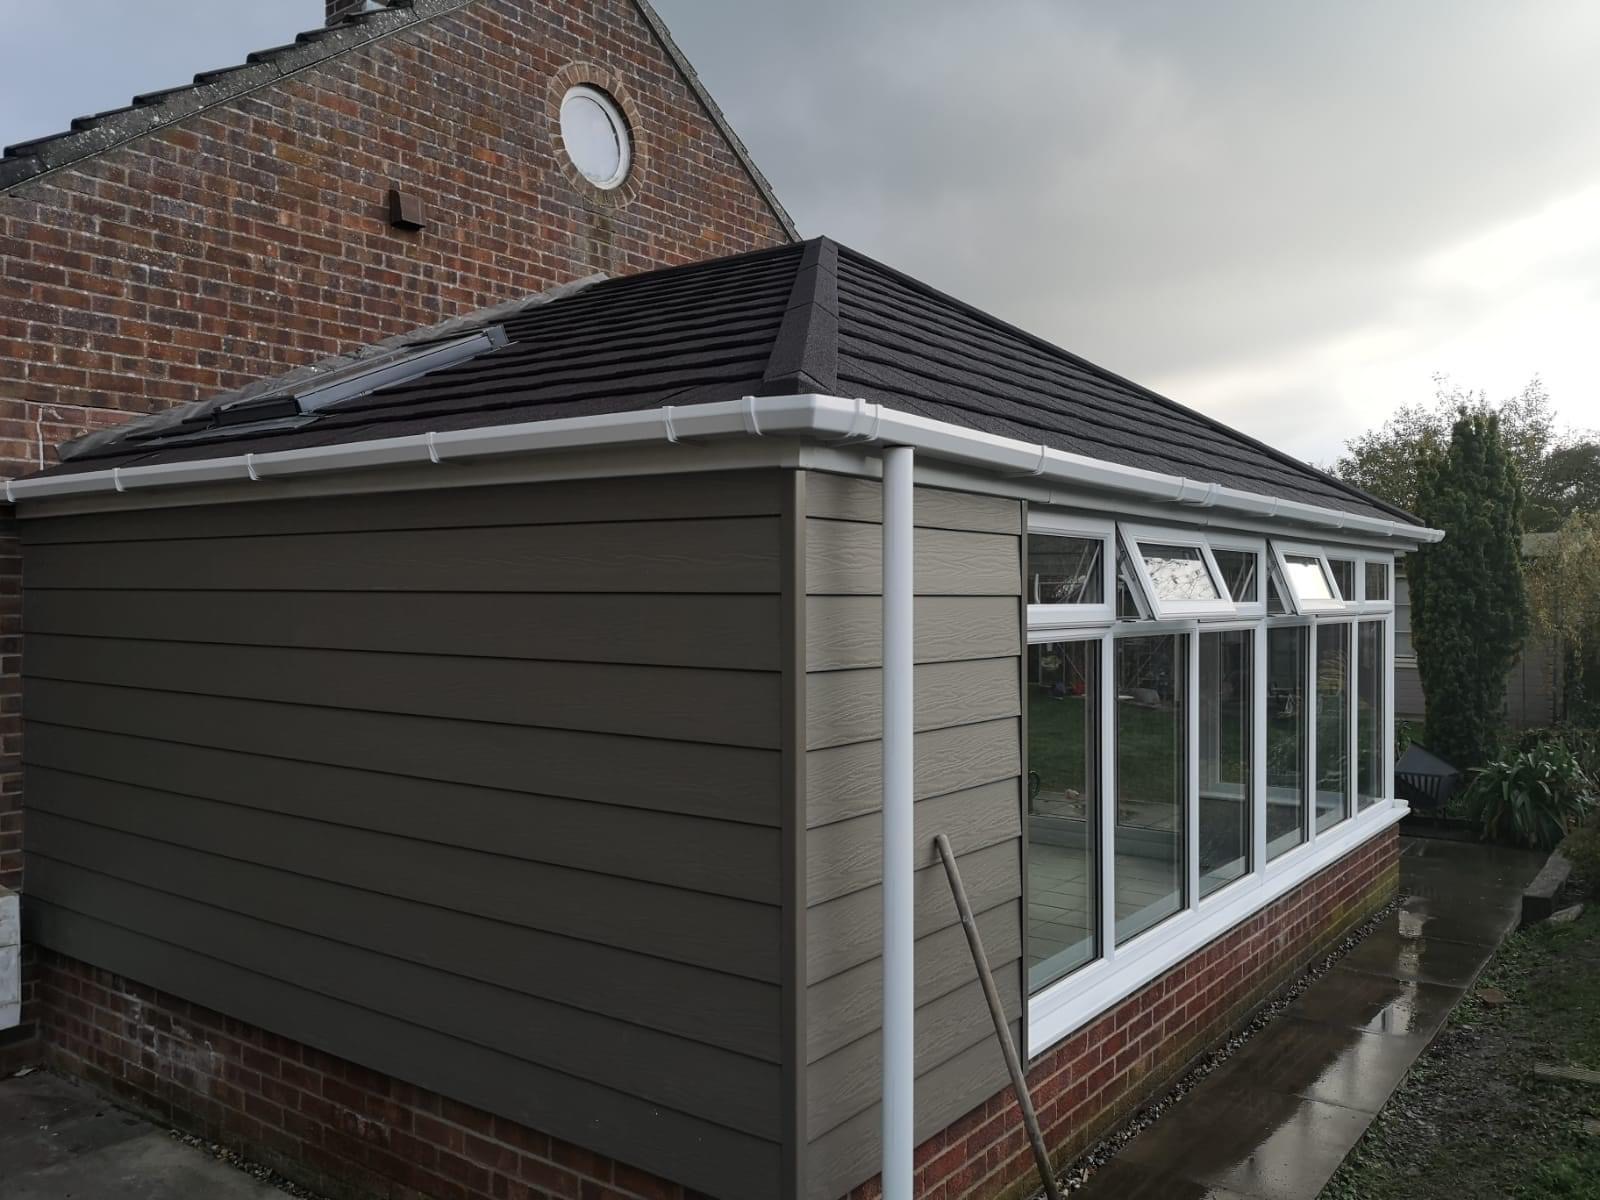 Tiled conservatory with wood panels and grey tiles